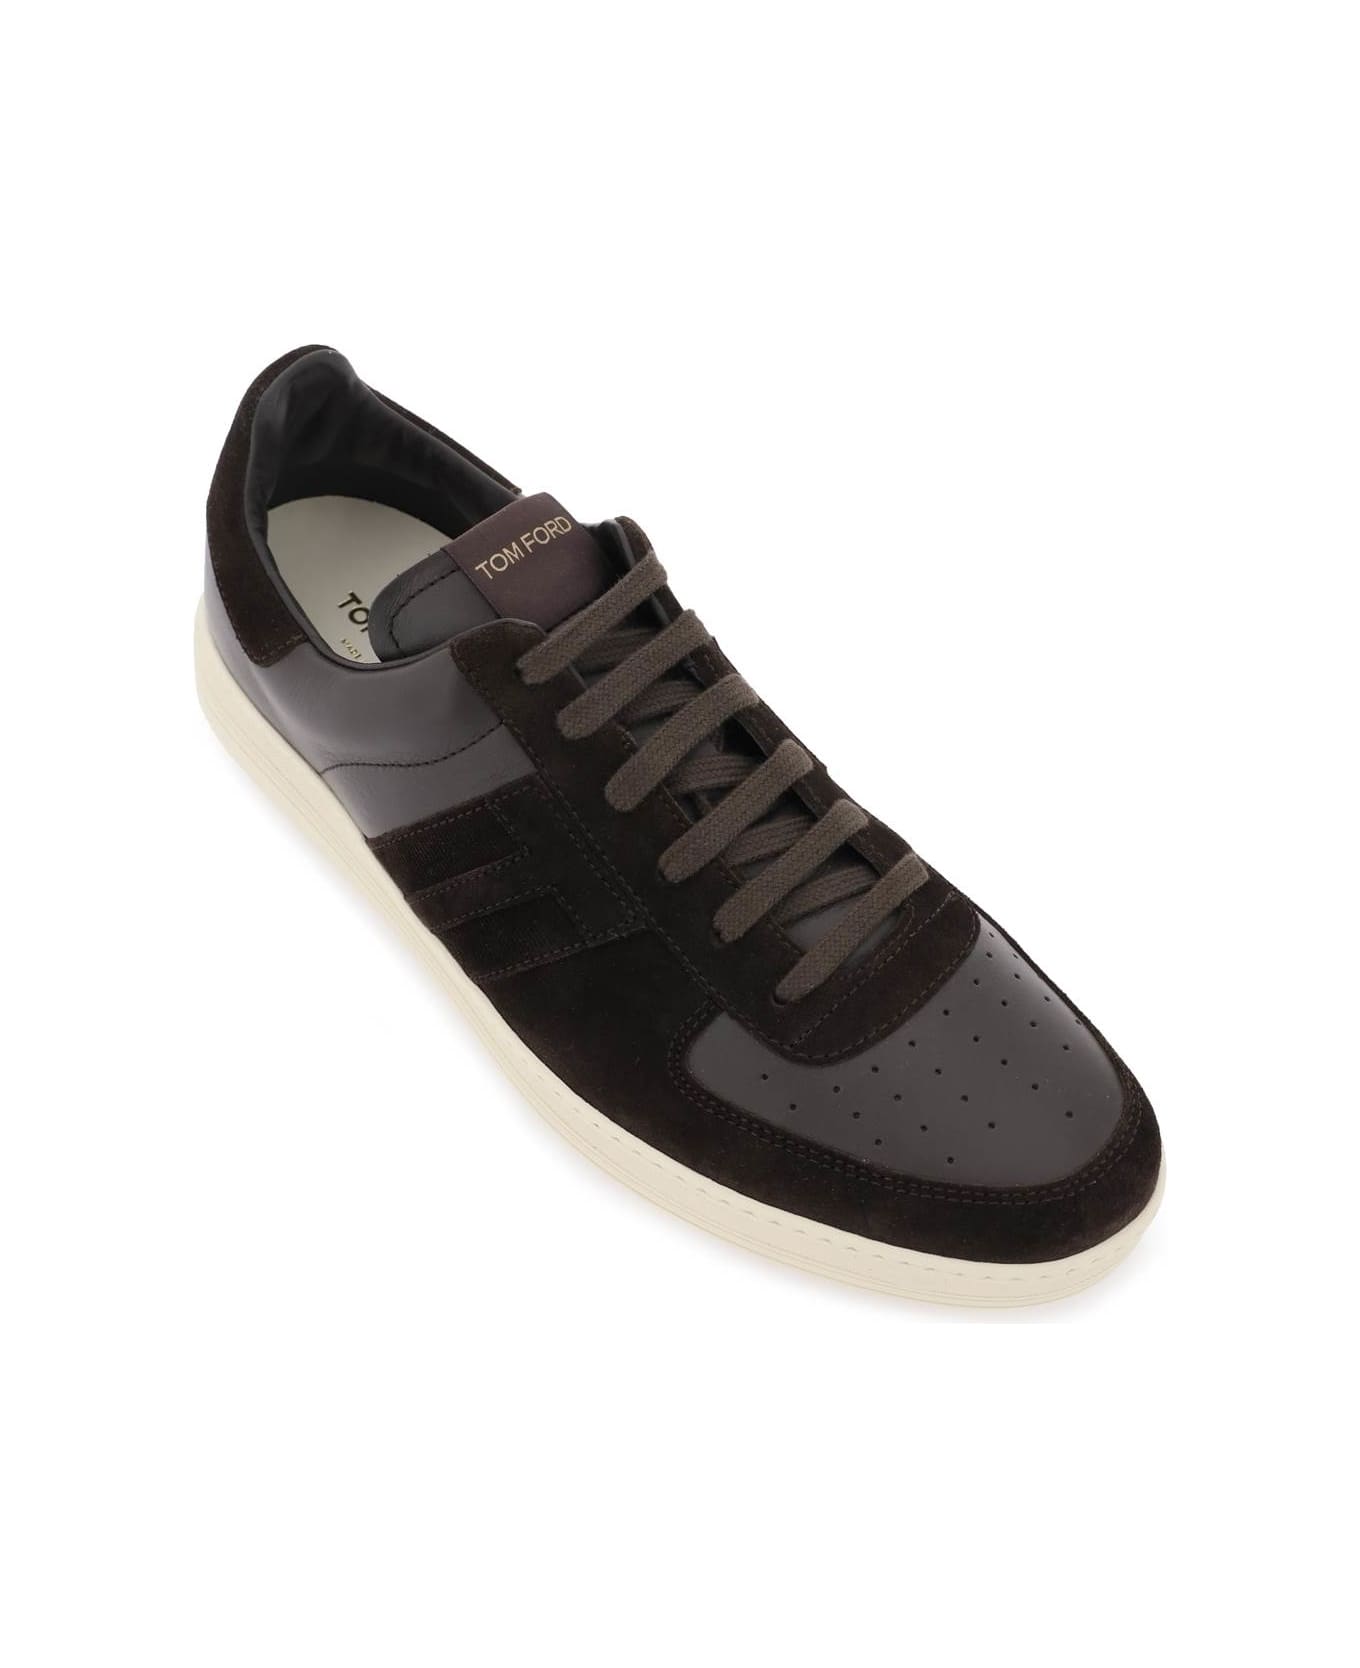 Tom Ford Suede And Leather 'radcliffe' Sneakers - BROWN CREAM (Brown) スニーカー